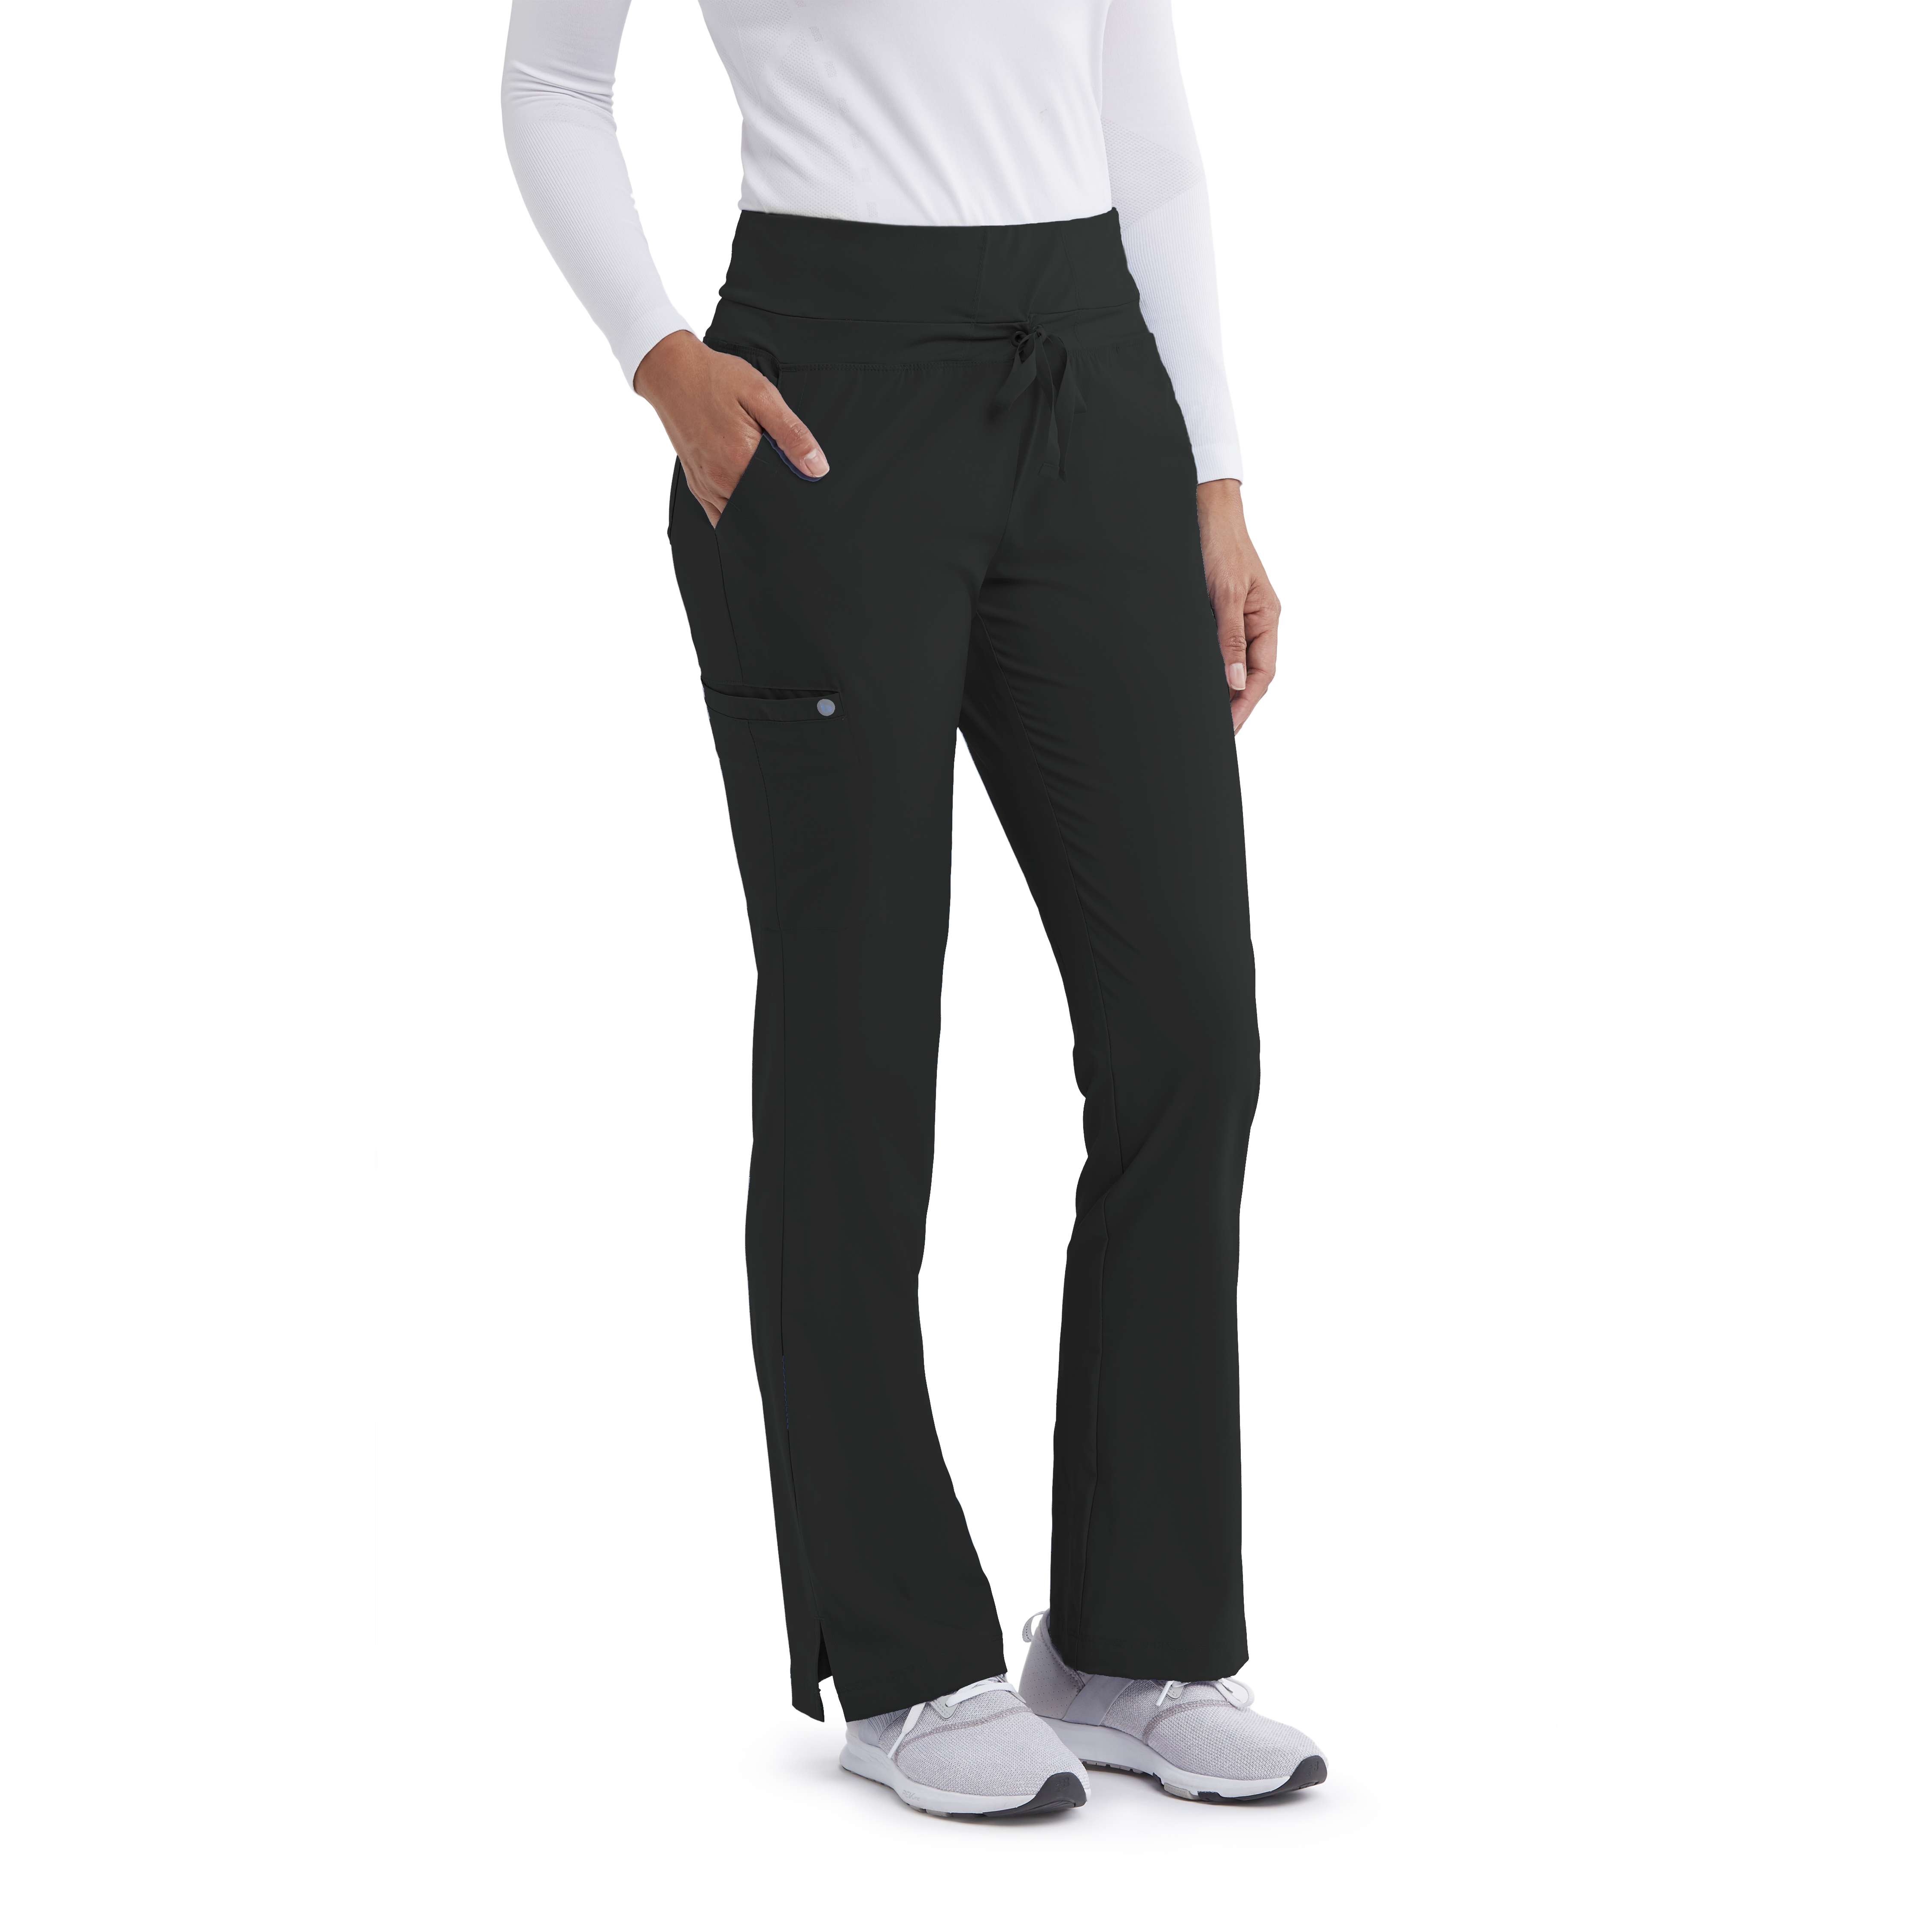 Barco One Spirit Pant-Barco One